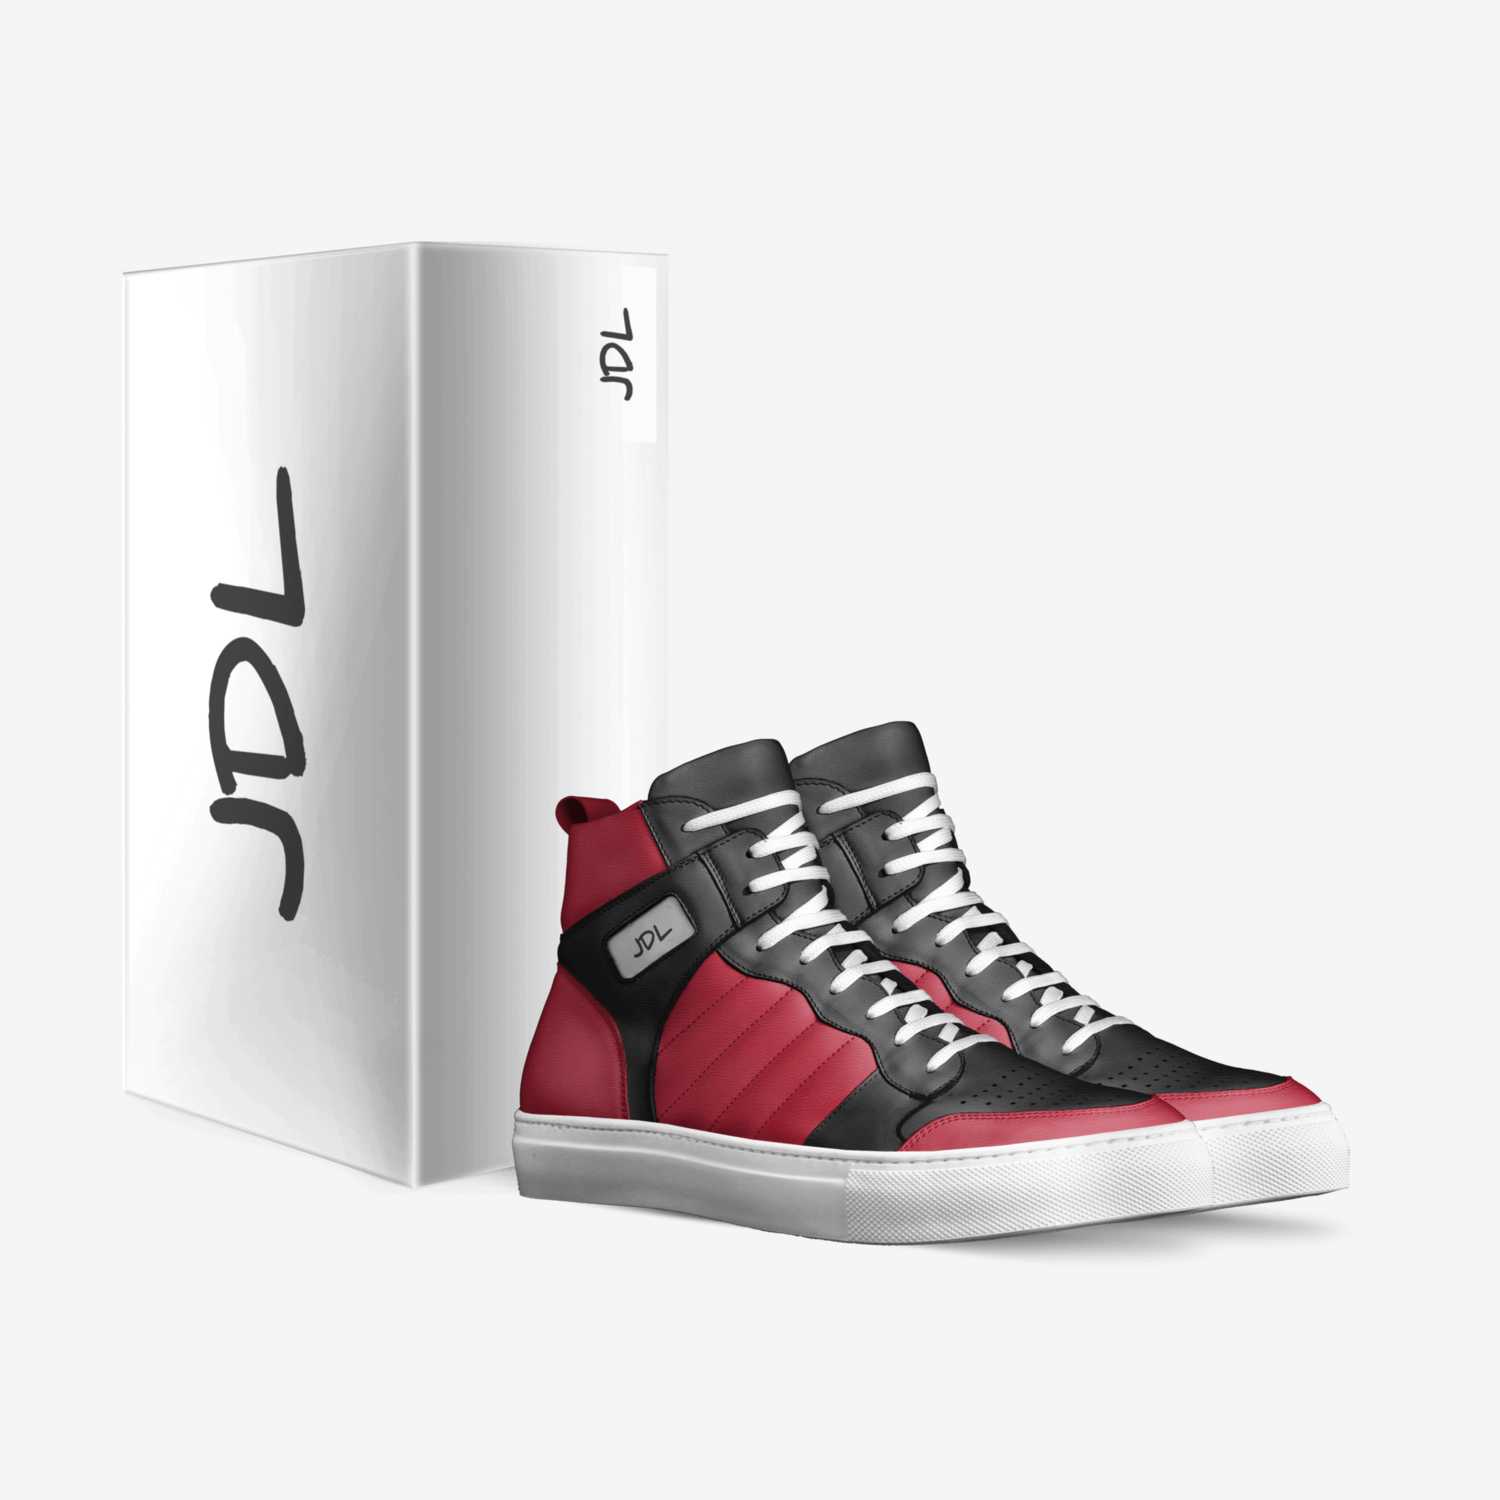 Jdl 1 custom made in Italy shoes by Jacob Lopez | Box view